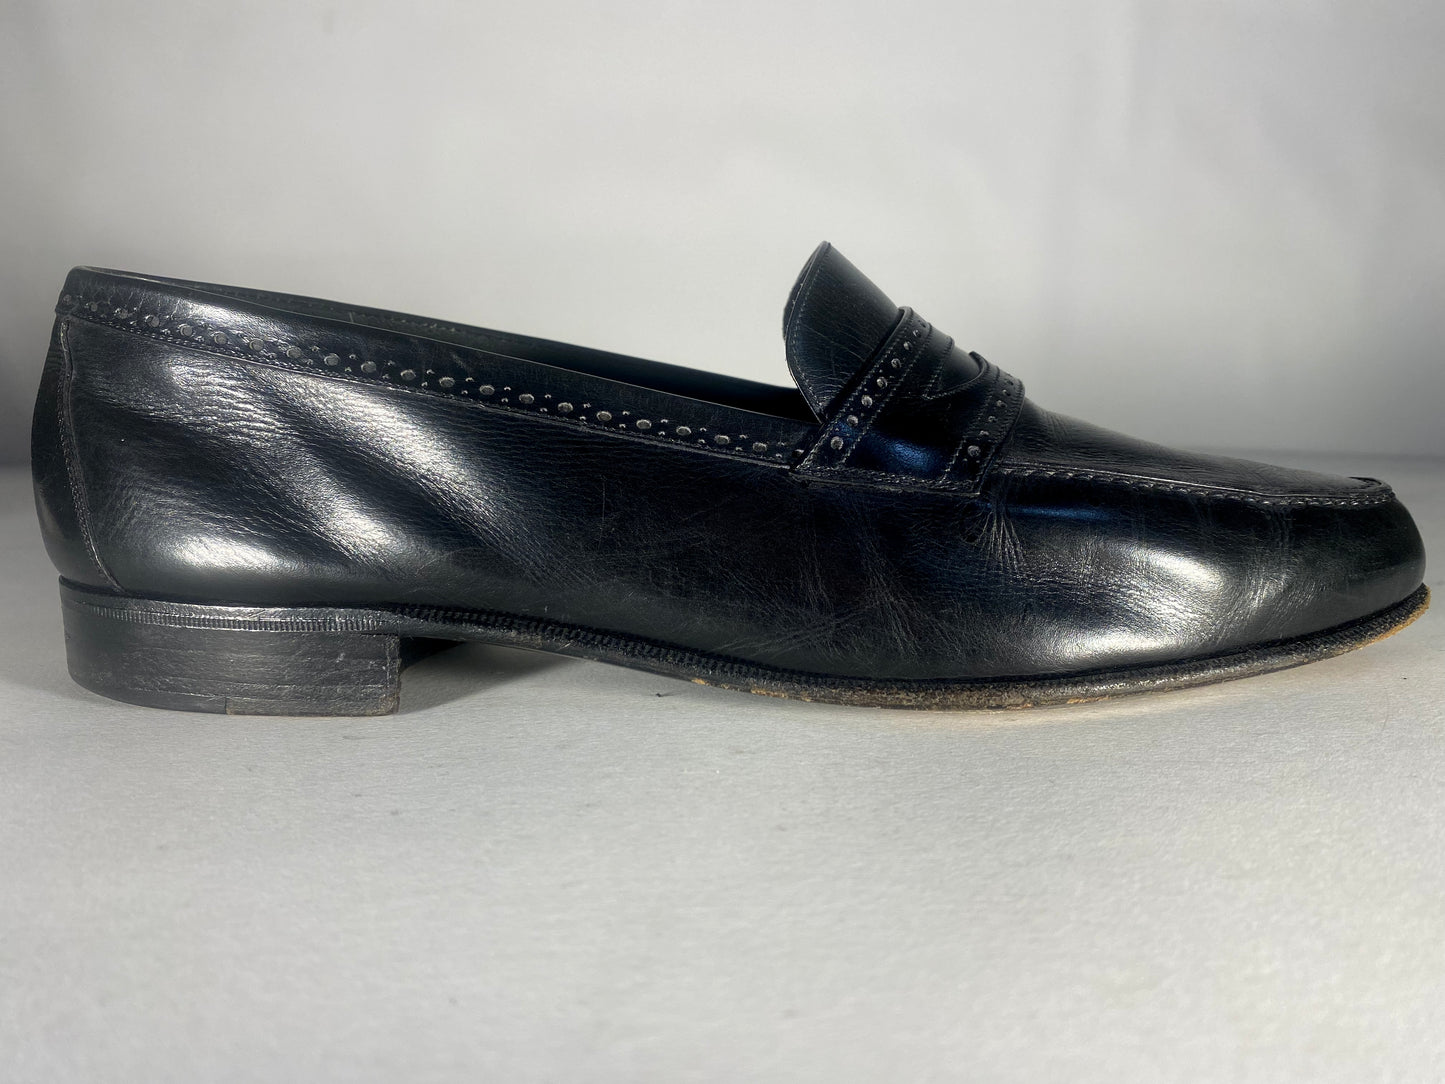 Ferragamo Penny Loafers Loafers, Size 7